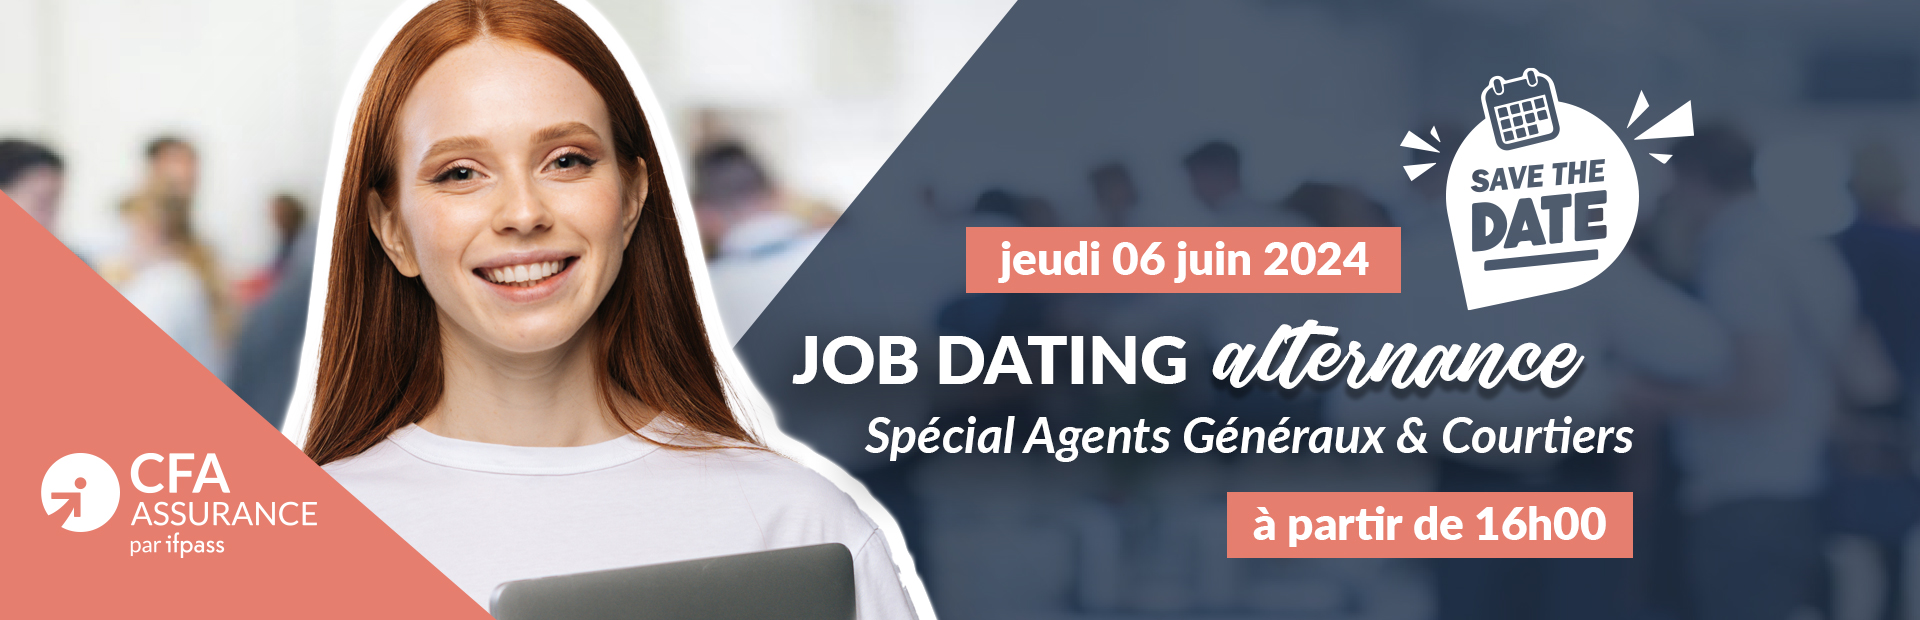 job dating courtiers agents